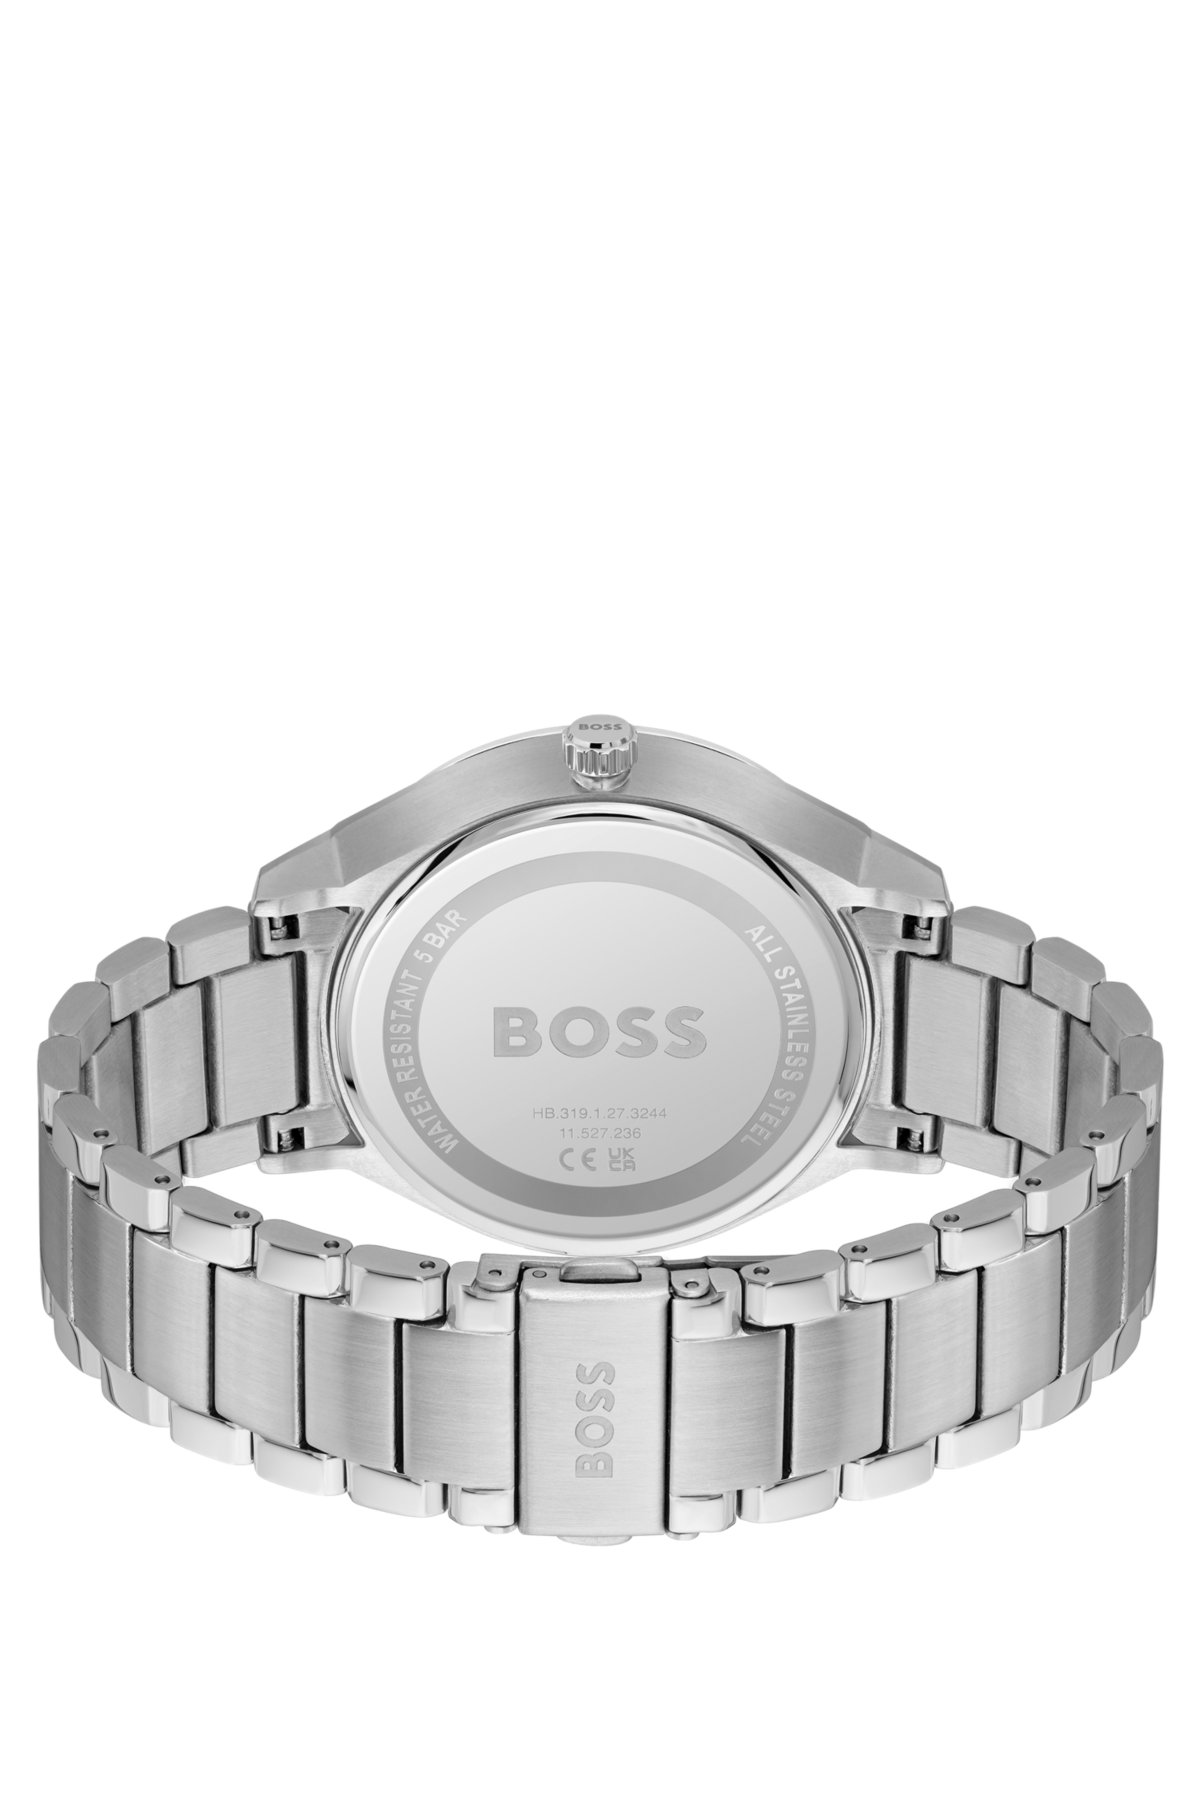 with bracelet BOSS stainless-steel Blue-dial link - watch